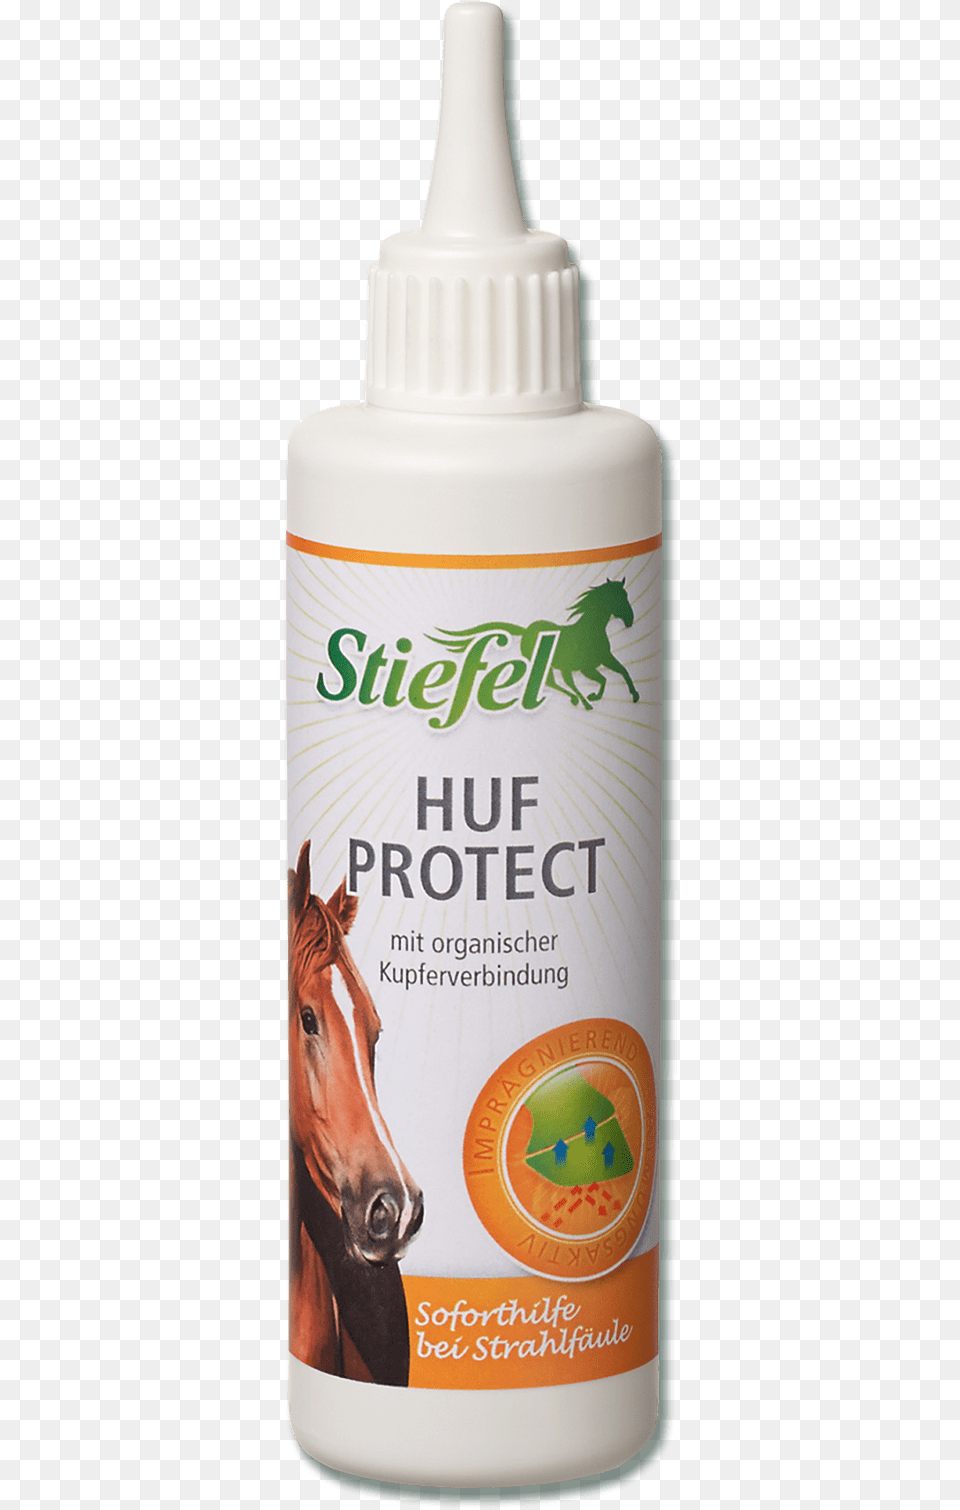 Stiefel Hoof Protect Stiefel Huf Protect, Bottle, Animal, Horse, Mammal Png